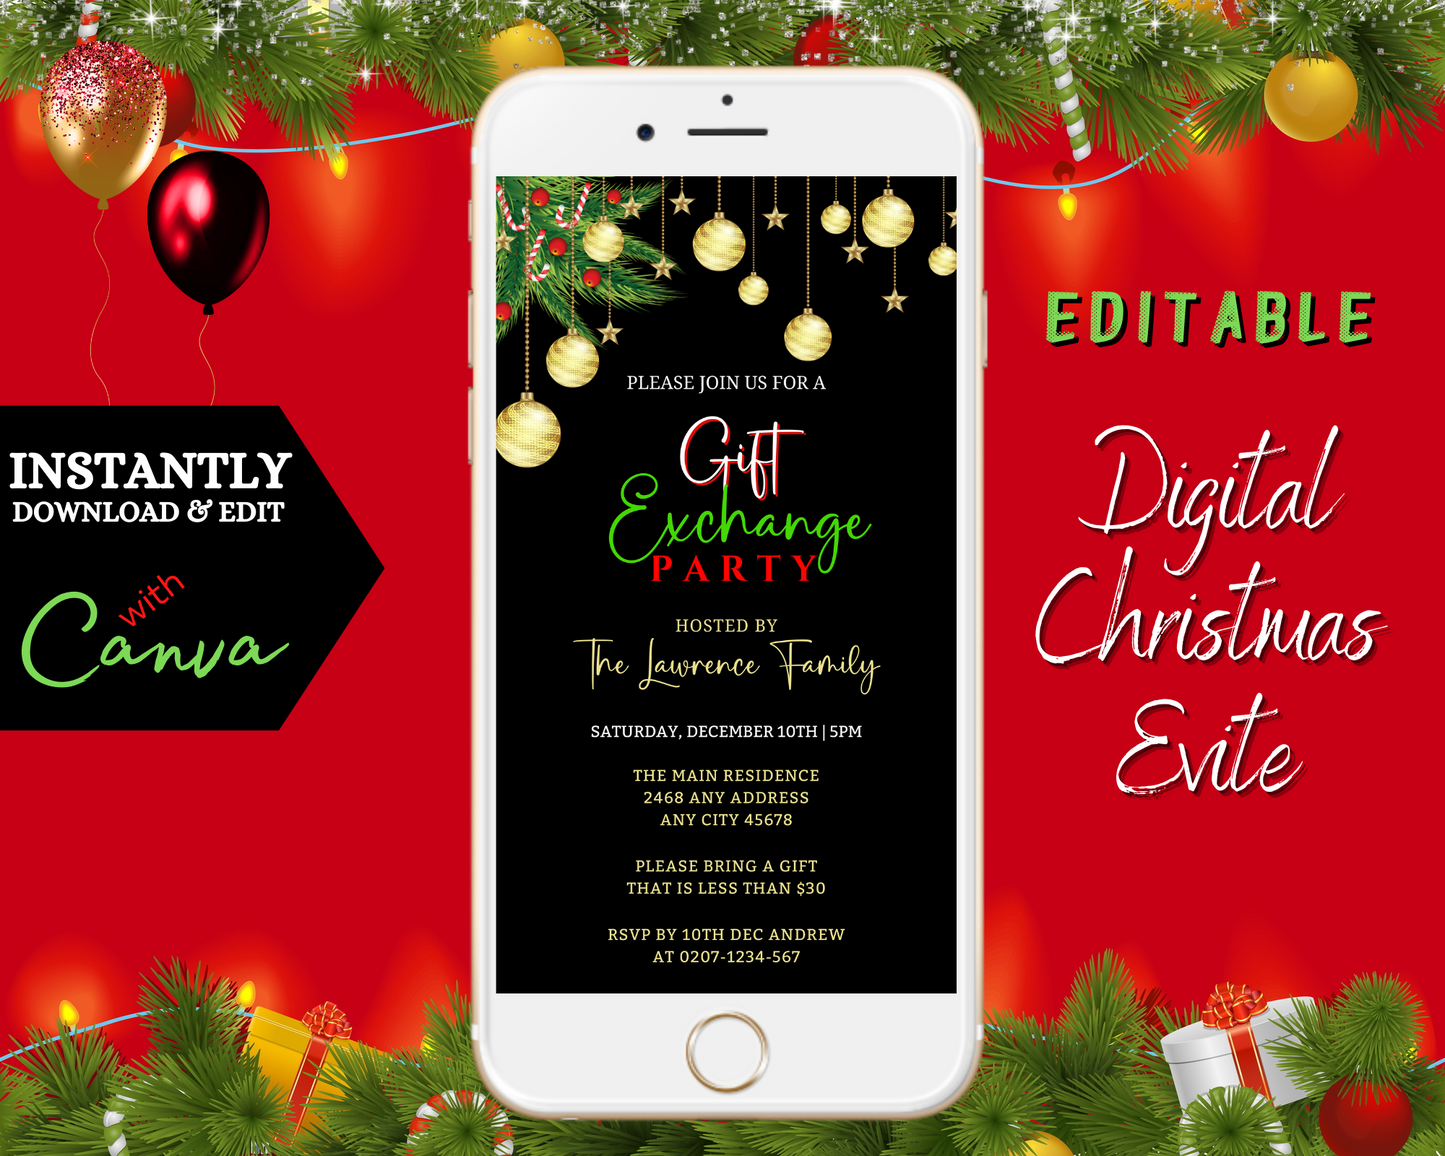 Gold Red Ornament Gift Exchange | Christmas Party Invitation on a white phone, red background, and green garlands. Editable via Canva for digital sharing.